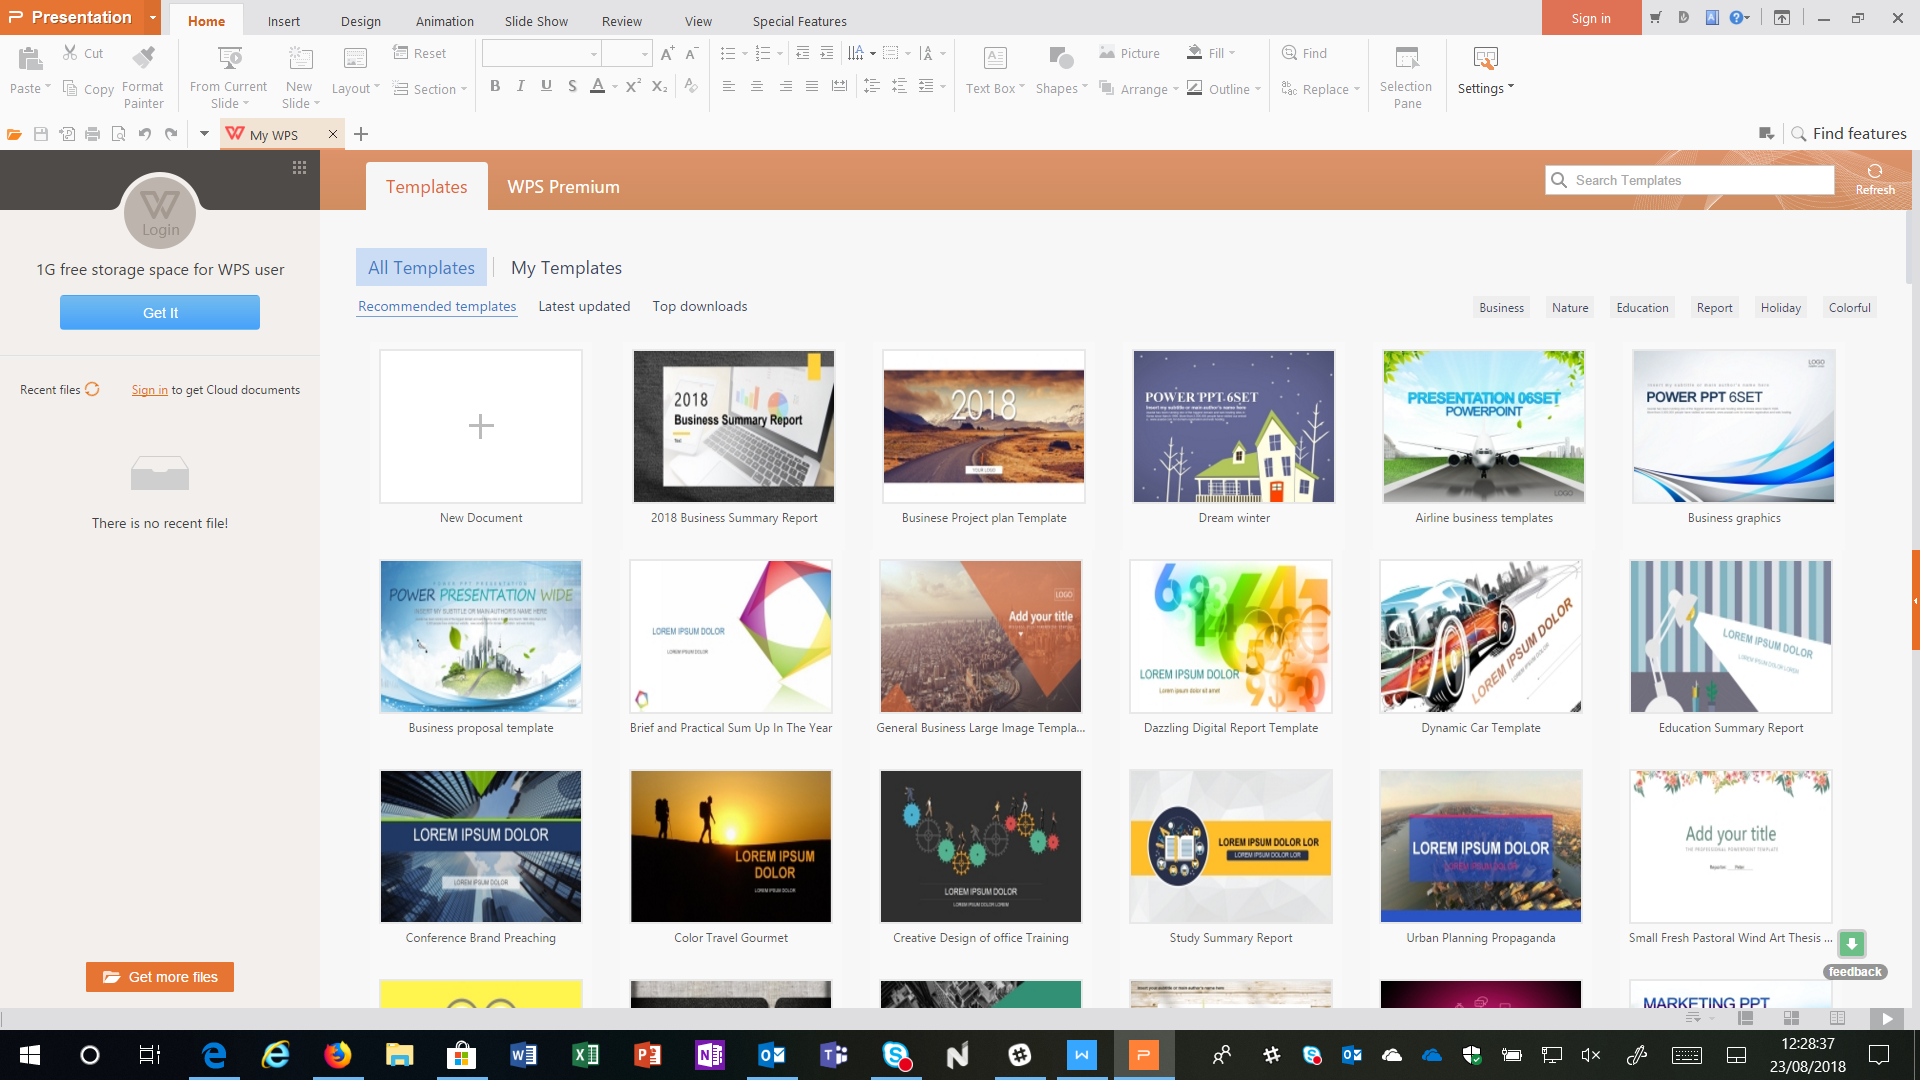 win 10 microsoft office download - They can efficiently stay on track while doing research online